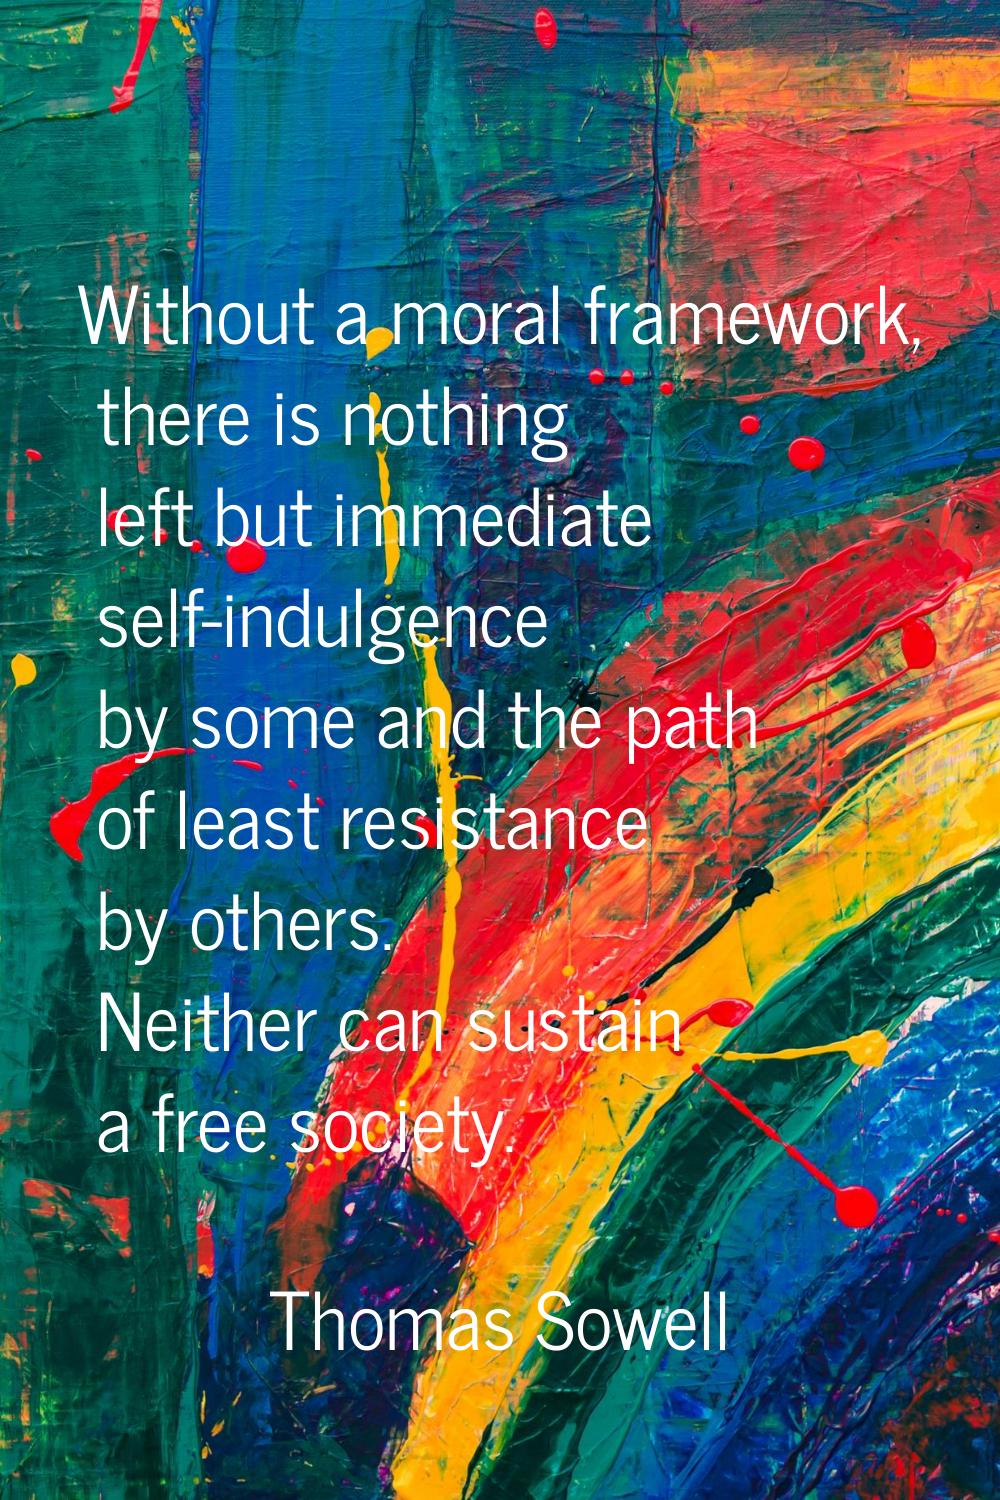 Without a moral framework, there is nothing left but immediate self-indulgence by some and the path